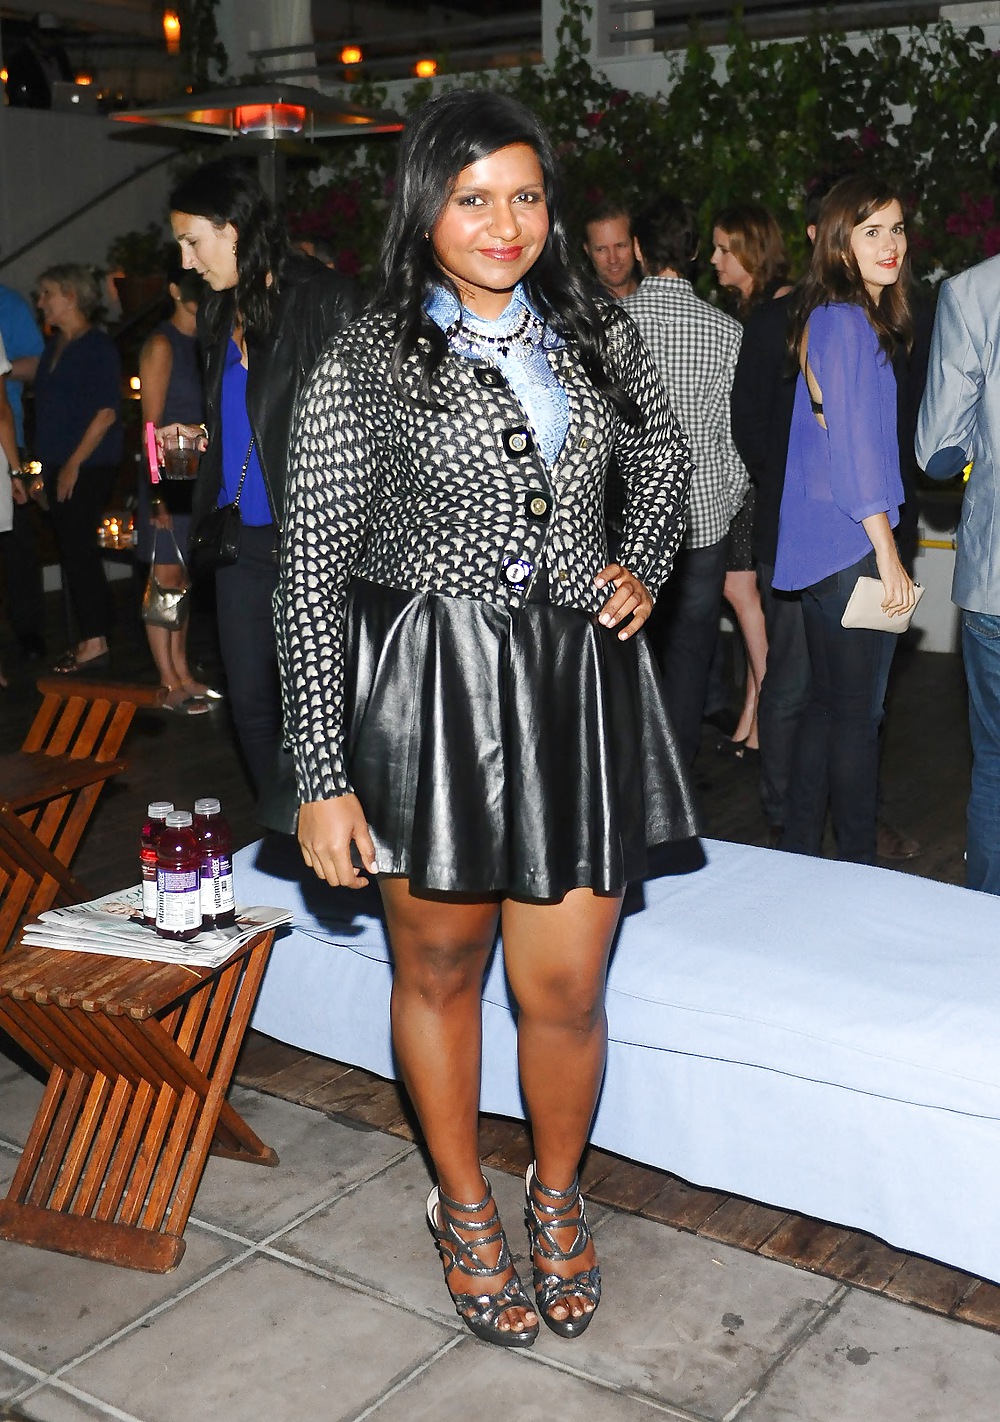 Hot Indian comedian Mindy Kaling - What would you do to her? #16250991